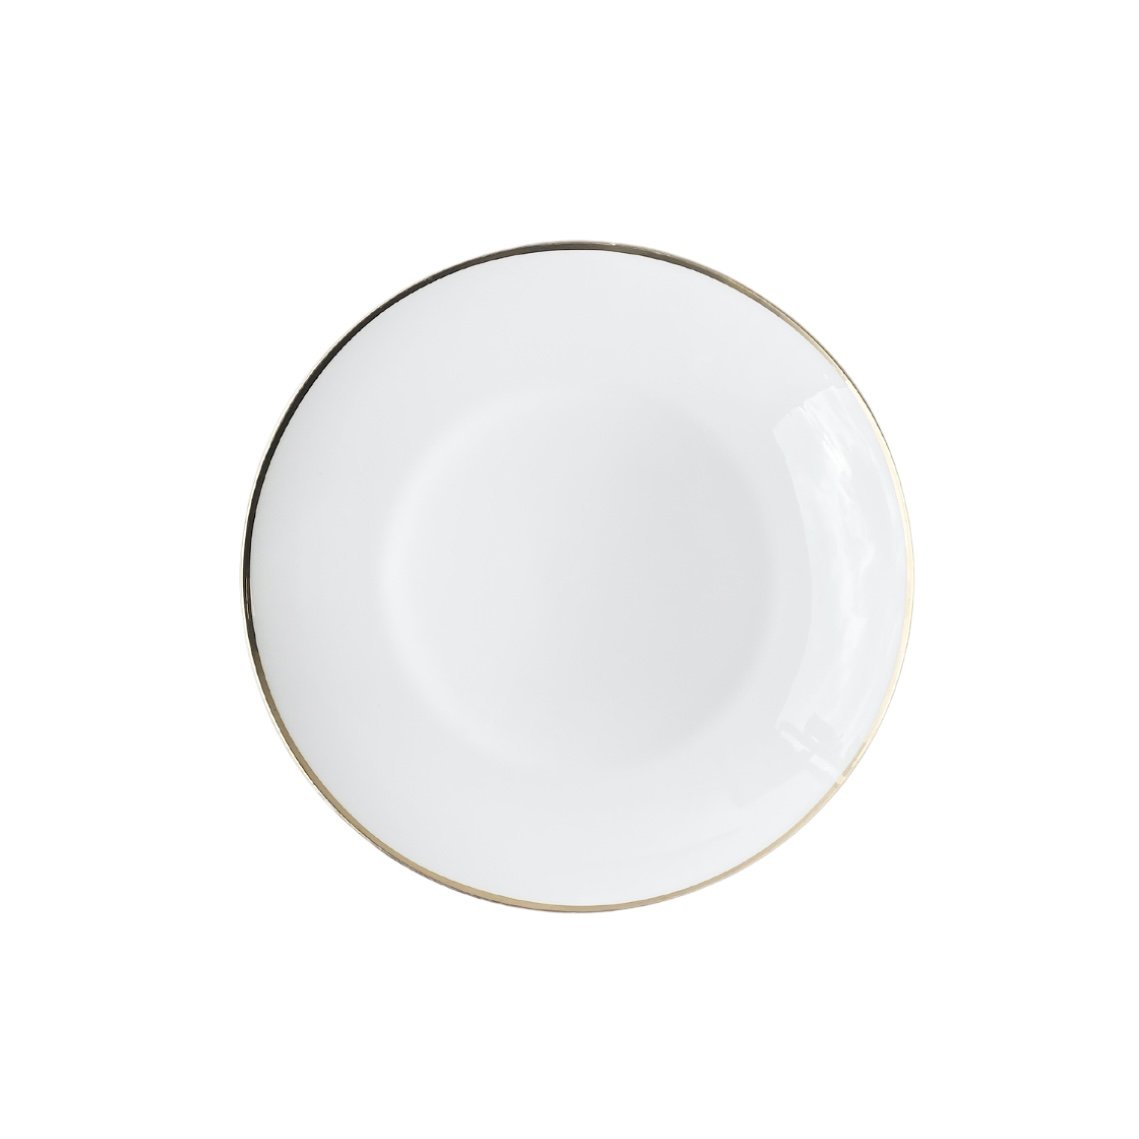 contemporary white and gold entree/dessert plate hire